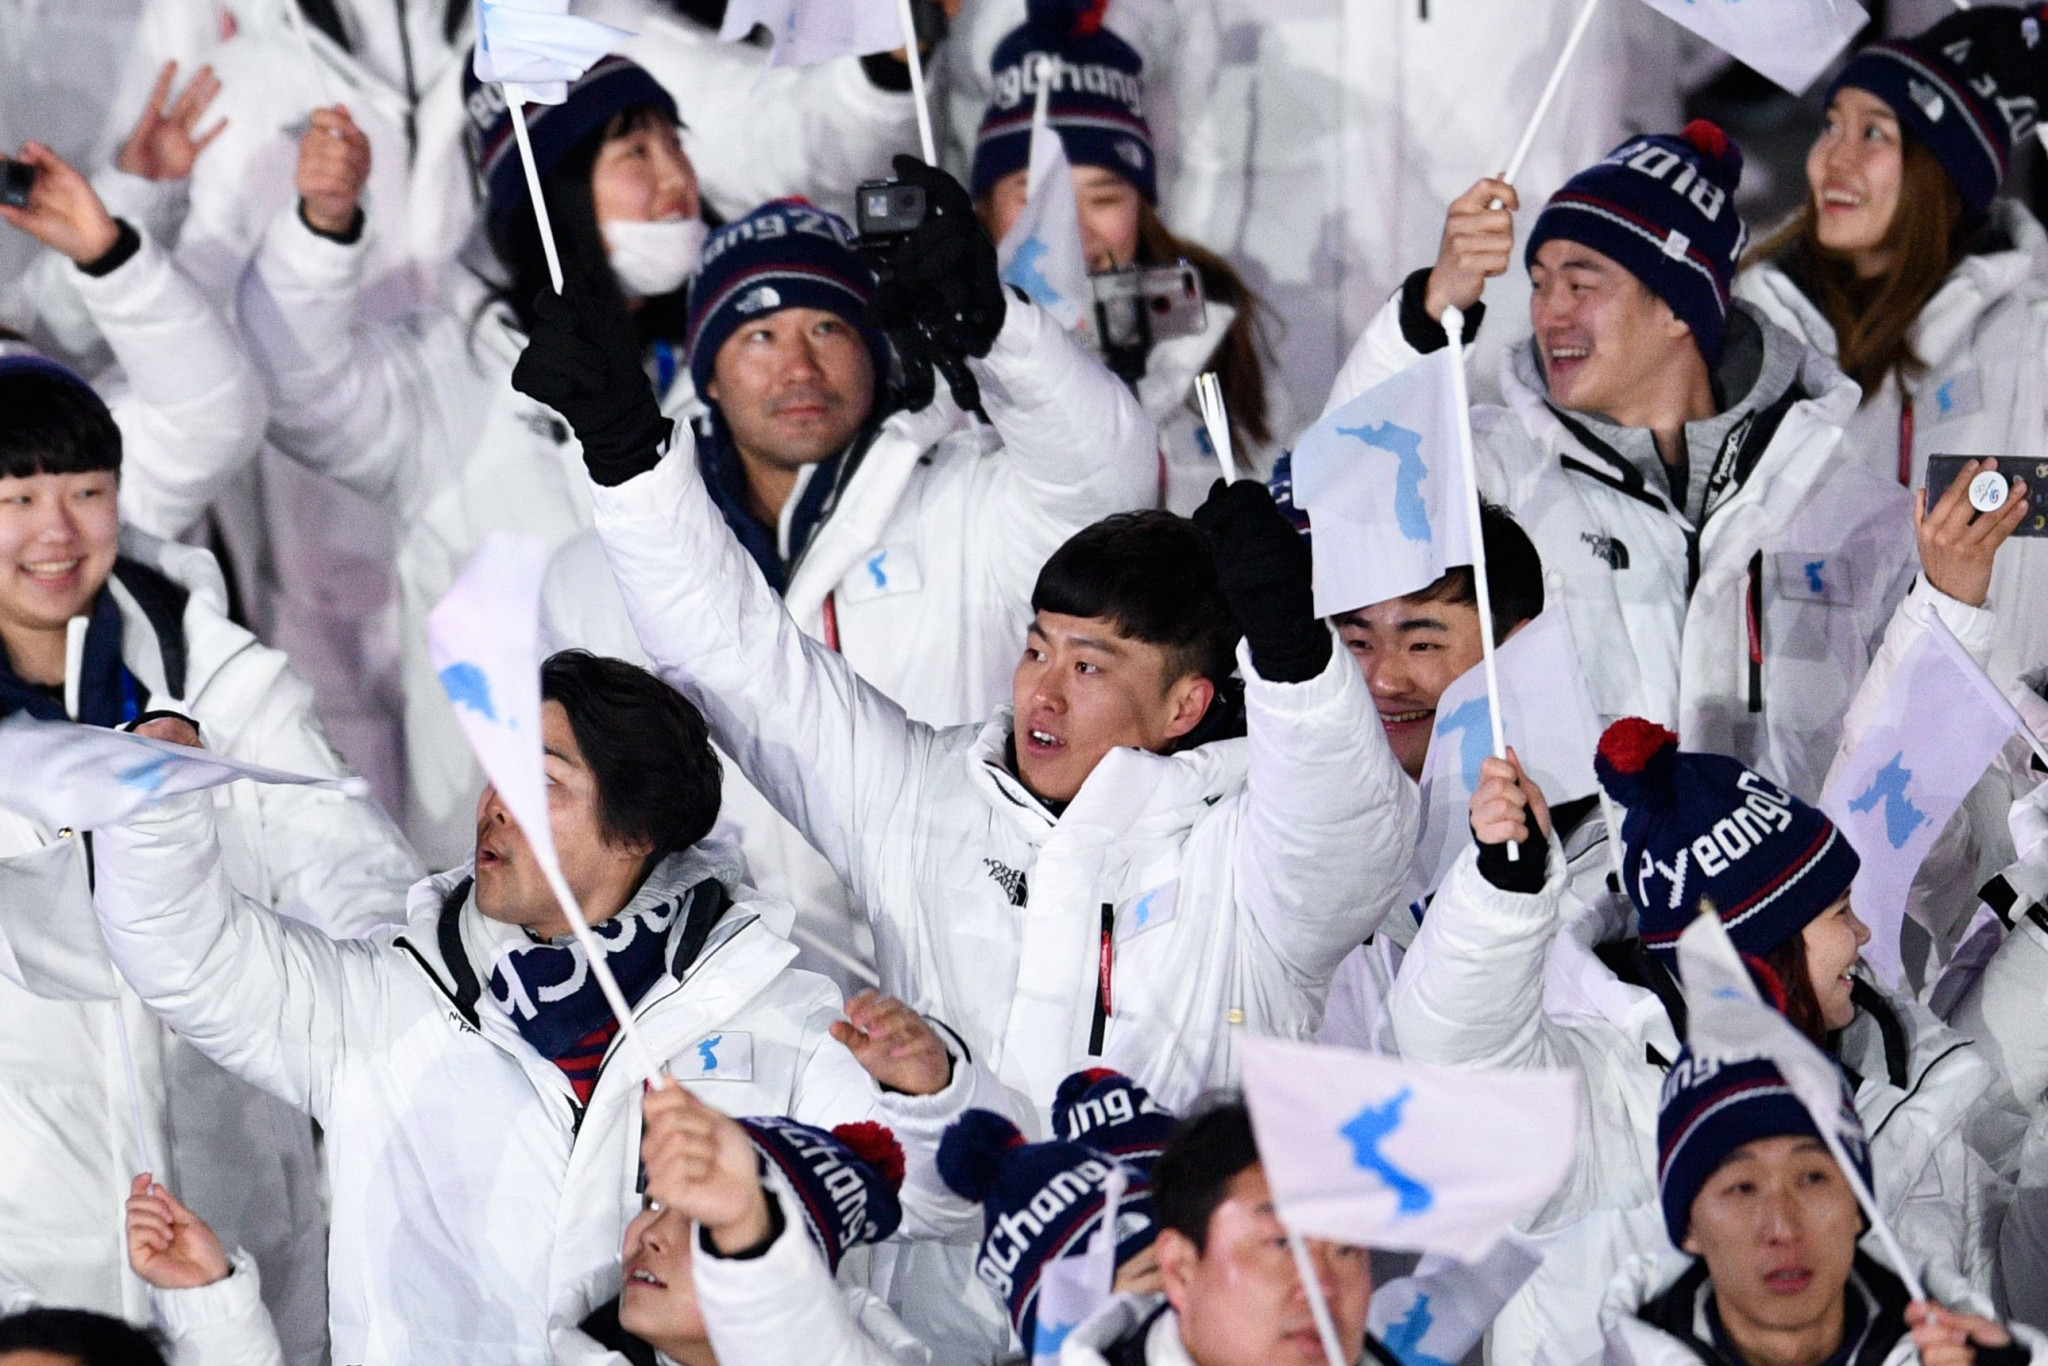 Teams from North and South Korea marched together in the Opening Ceremony for the first time since Turin 2006, an historic occasion hailed by IOC President Thomas Bach ©Getty Images